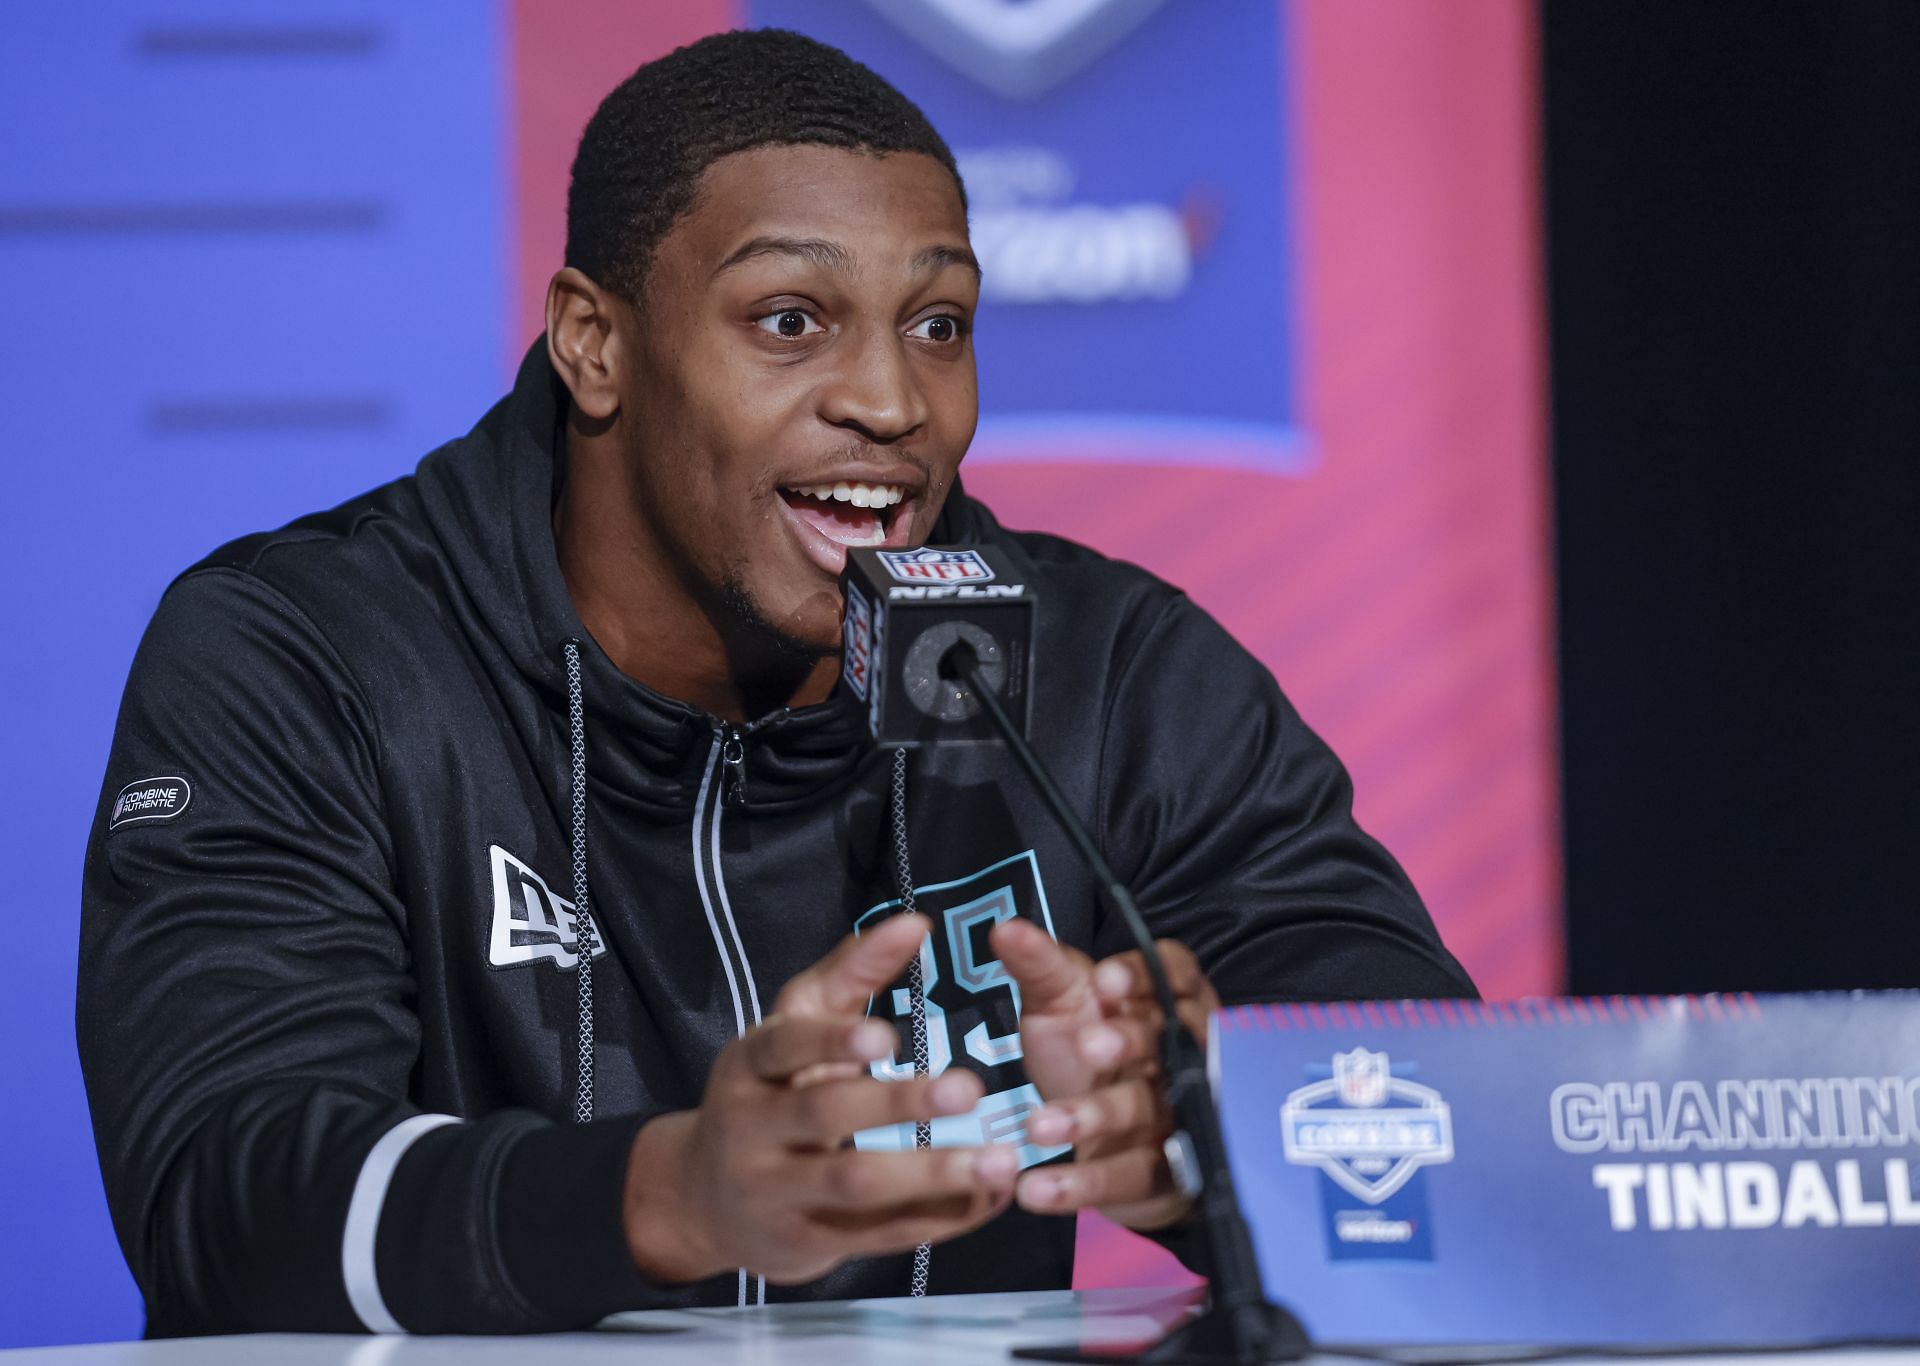 Georgia Bulldogs linebacker Channing Tindall at the 2022 NFL Combine